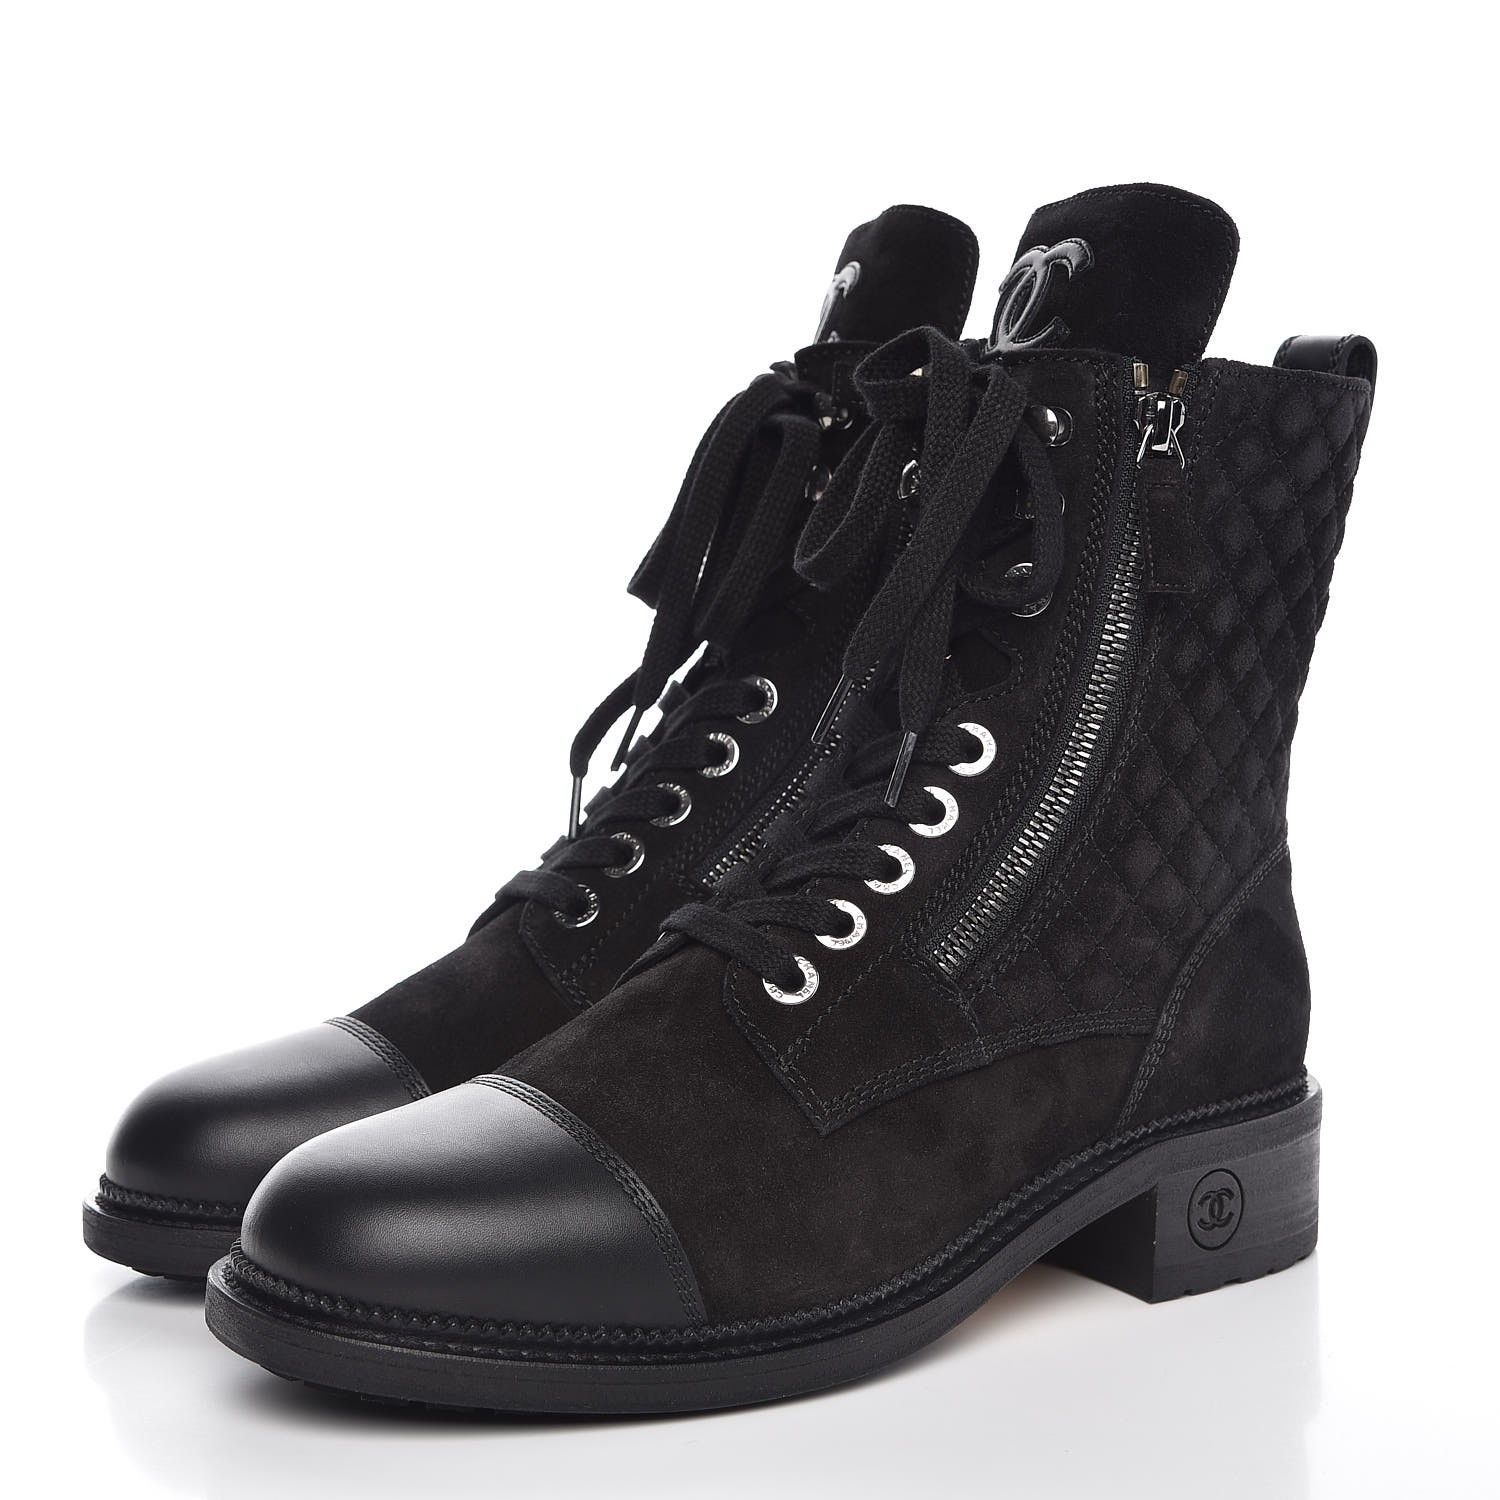 CHANEL Suede Quilted Cap Toe Combat Boots 40 Black 317239